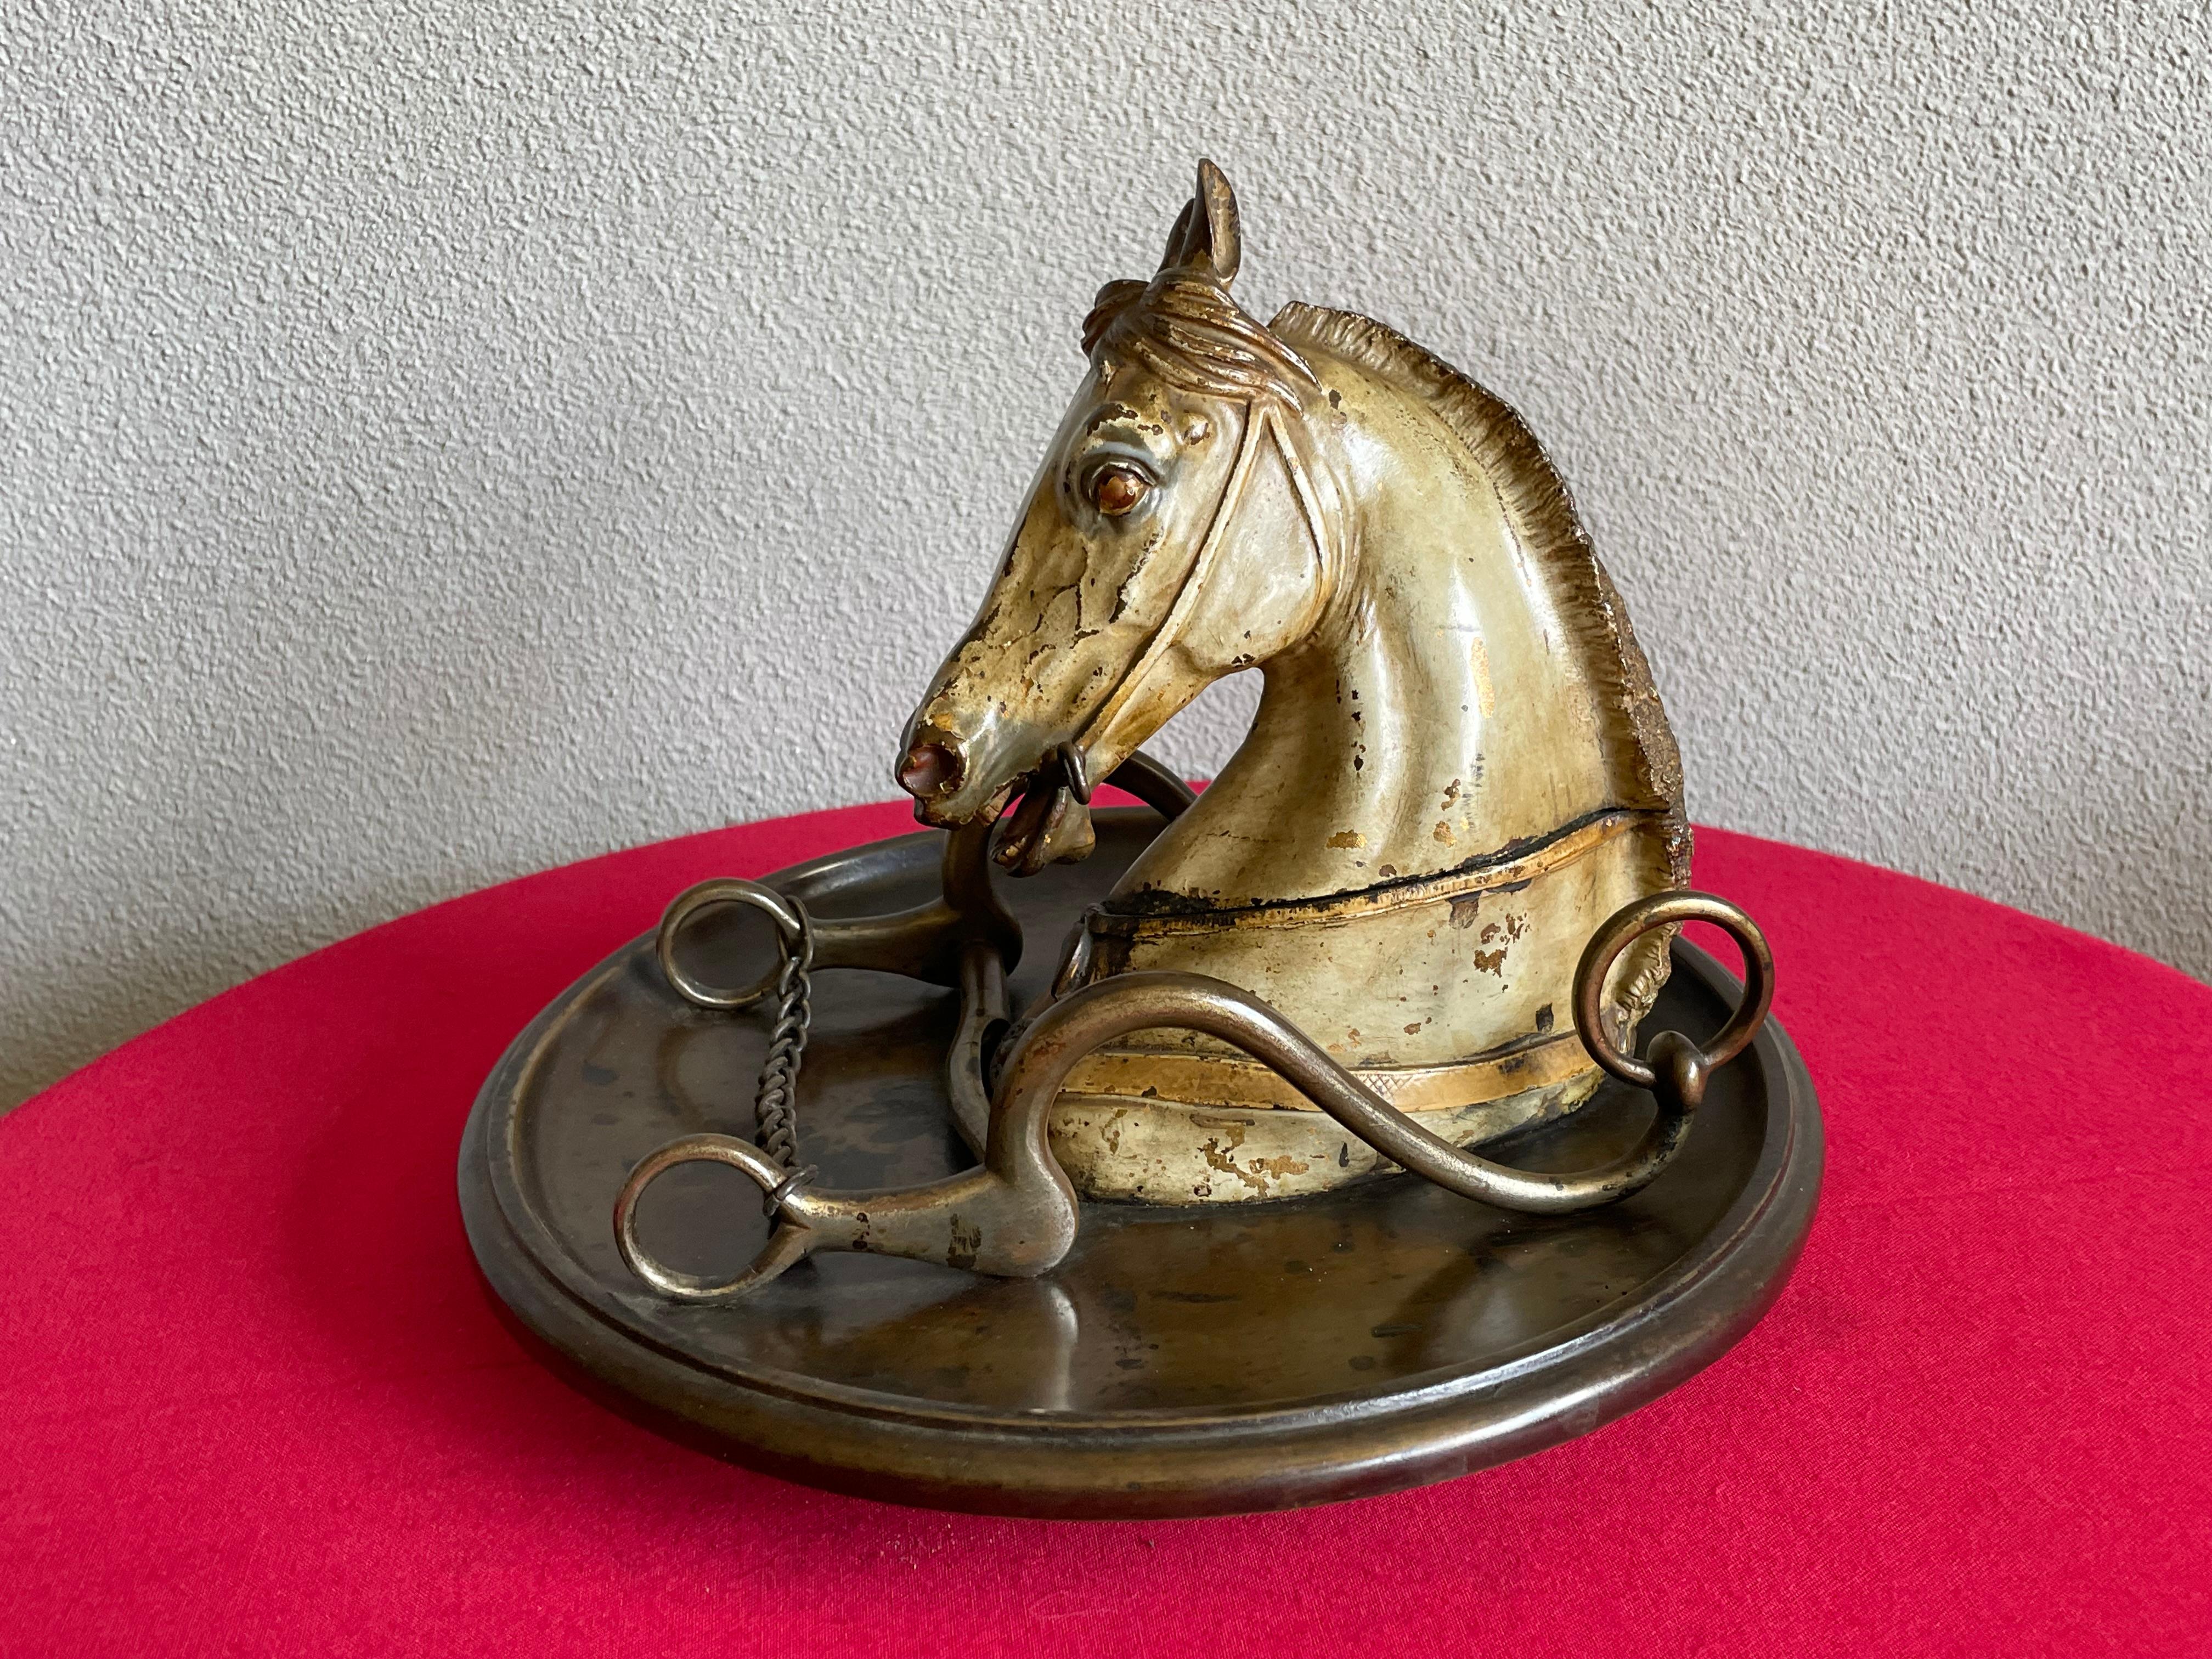 Stylish, rare and top quality workmanship desk piece.

This antique is not only rare, stunning, original and top quality made, it also is very decorative and highly collectible. Both for collectors of cold painted Viennese bronzes and for horse